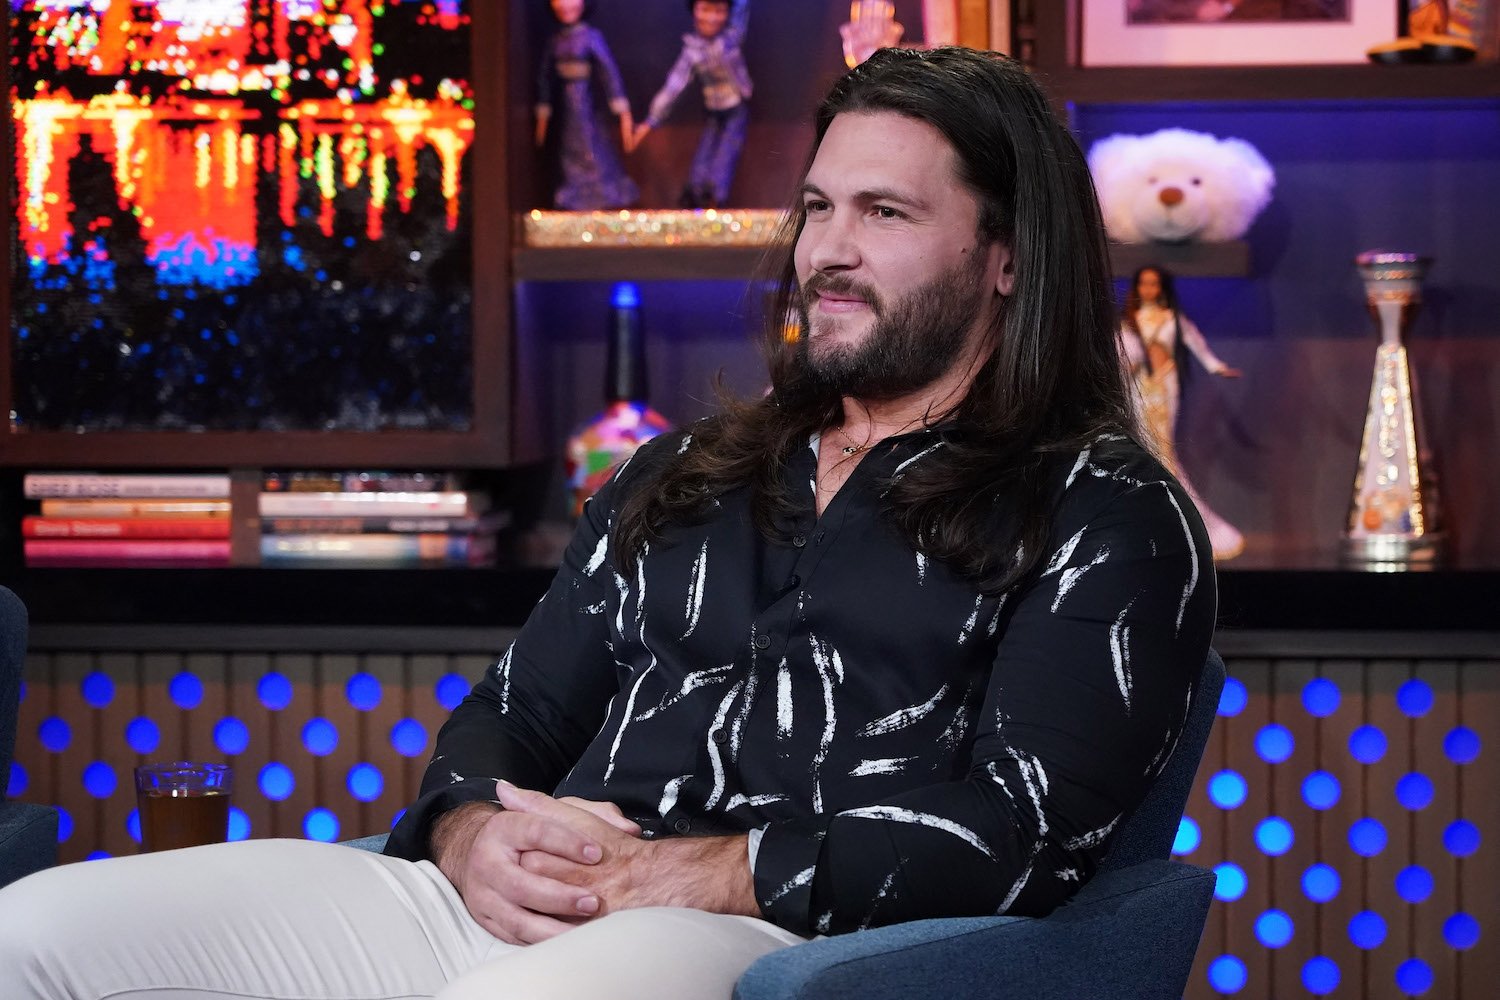 'Vanderpump Rules' star Brock Davies wearing a black and white button down on the set of 'Watch What Happens Live'